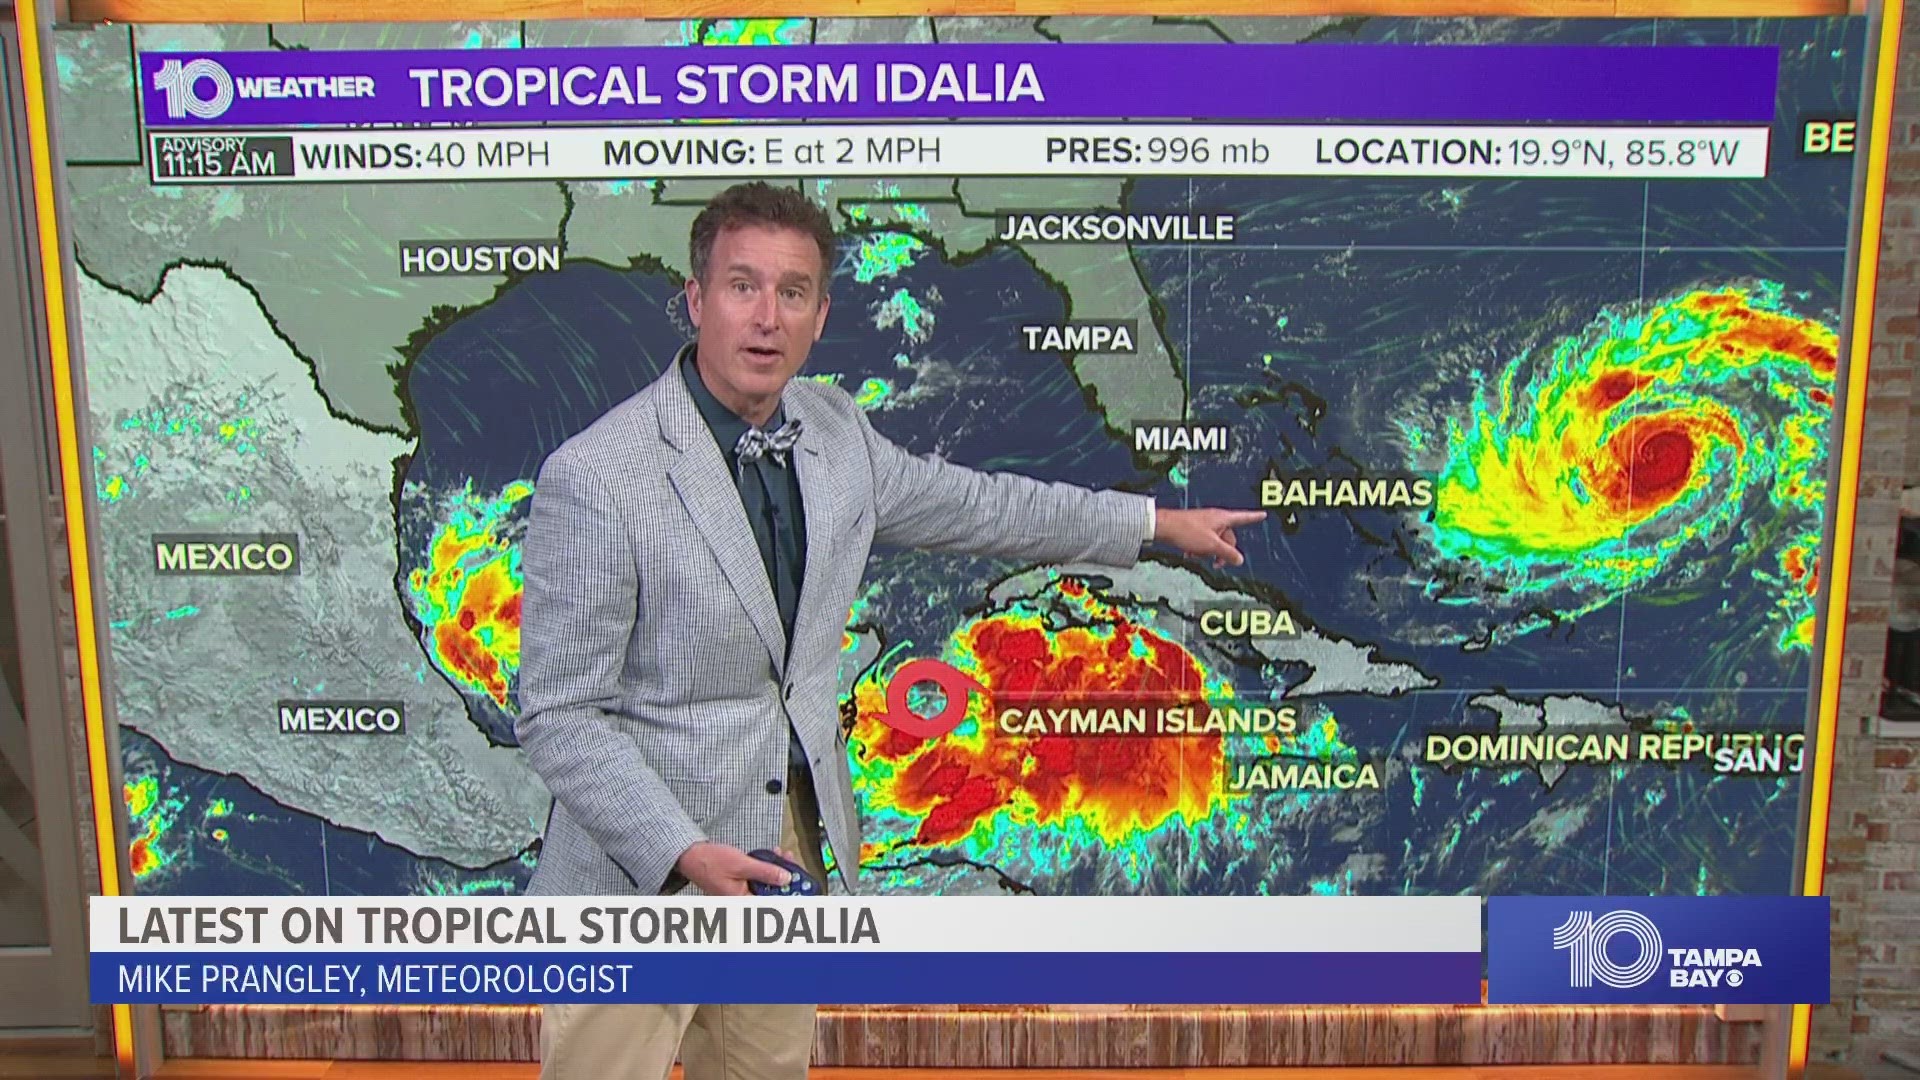 A NOAA Hurricane Hunter crew found the tropical depression has strengthened to become Tropical Storm Idalia.